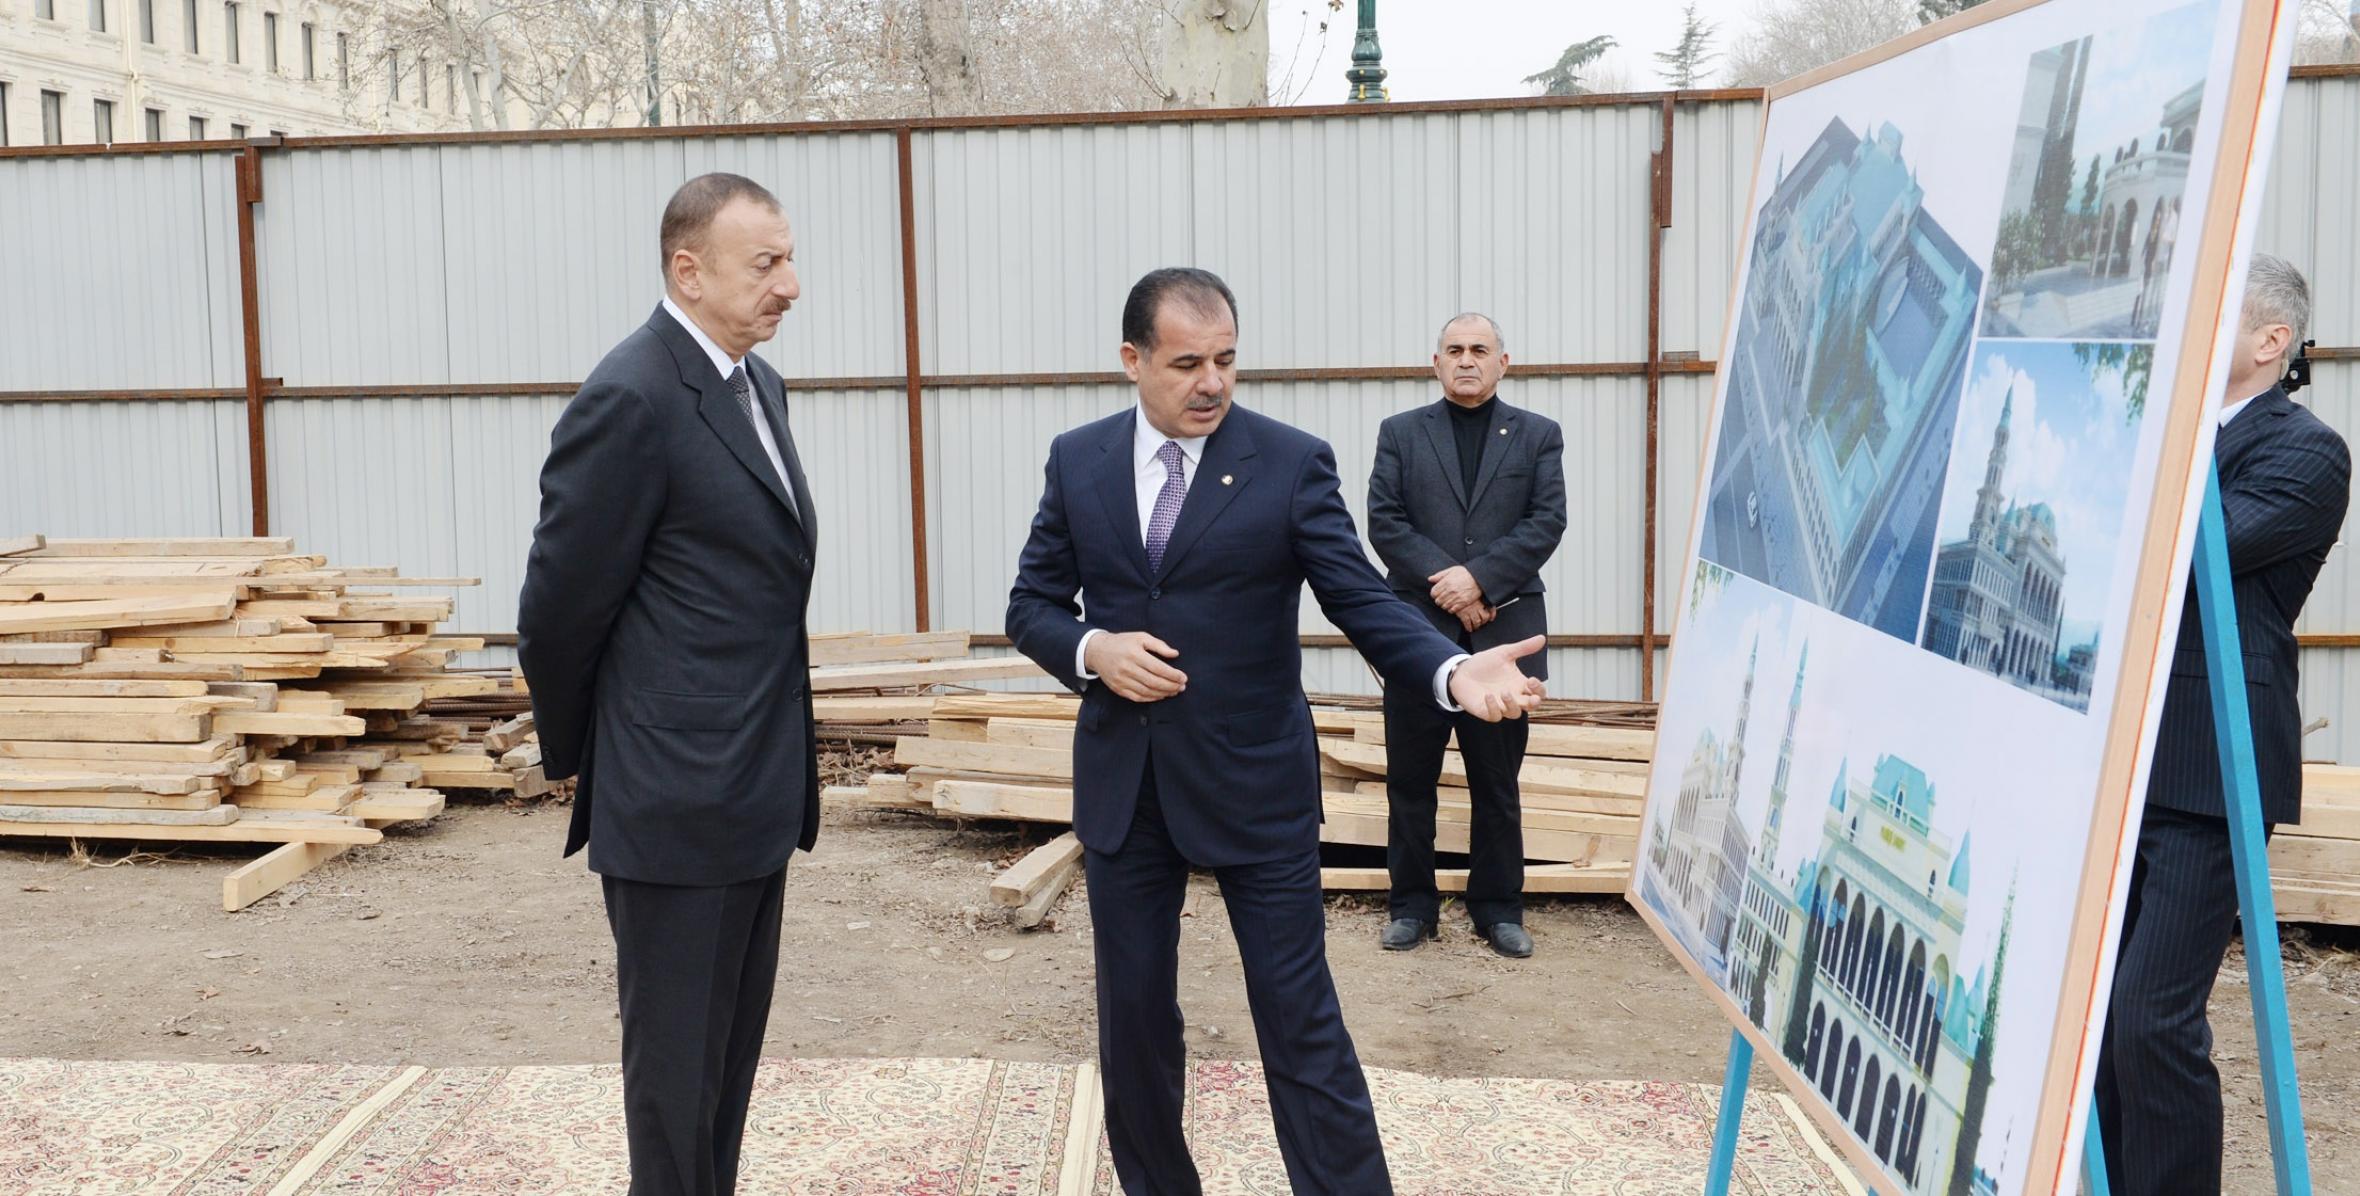 Ilham Aliyev was familiarized with the construction of a new building of the Ganja State Philharmonic Hall